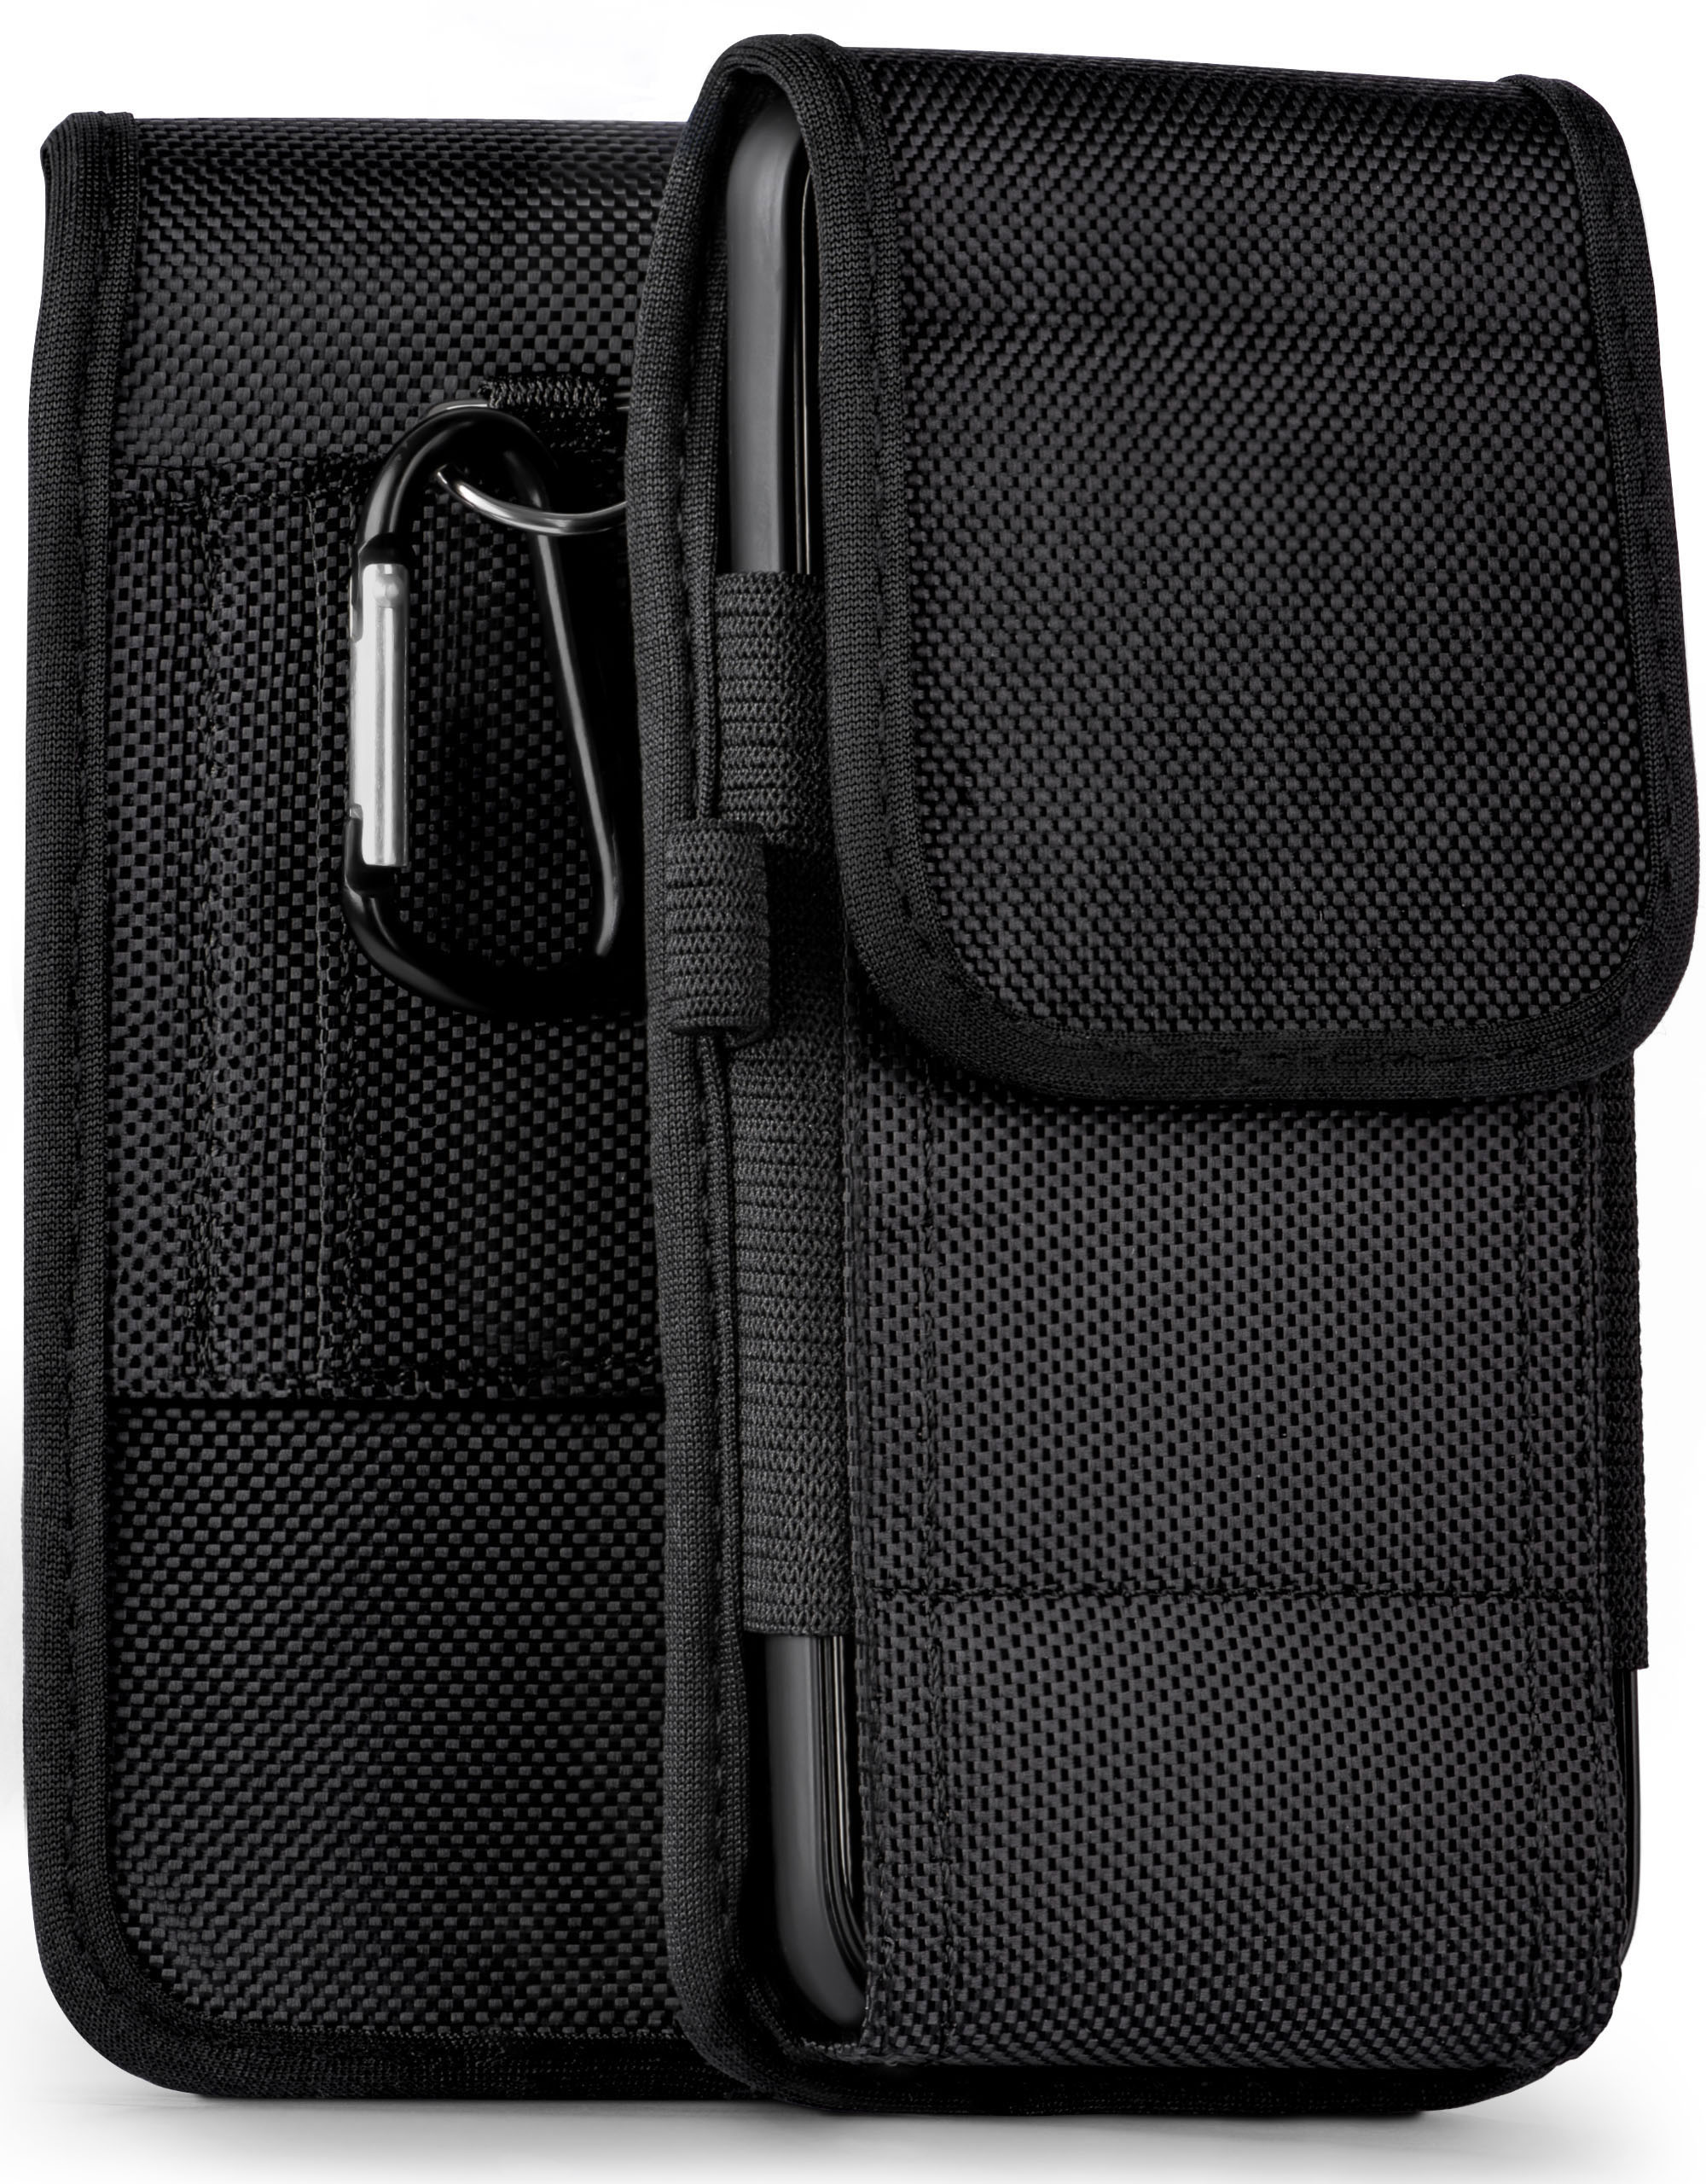 Holster, MOEX Agility View2 Case, Trail Wiko, Plus,